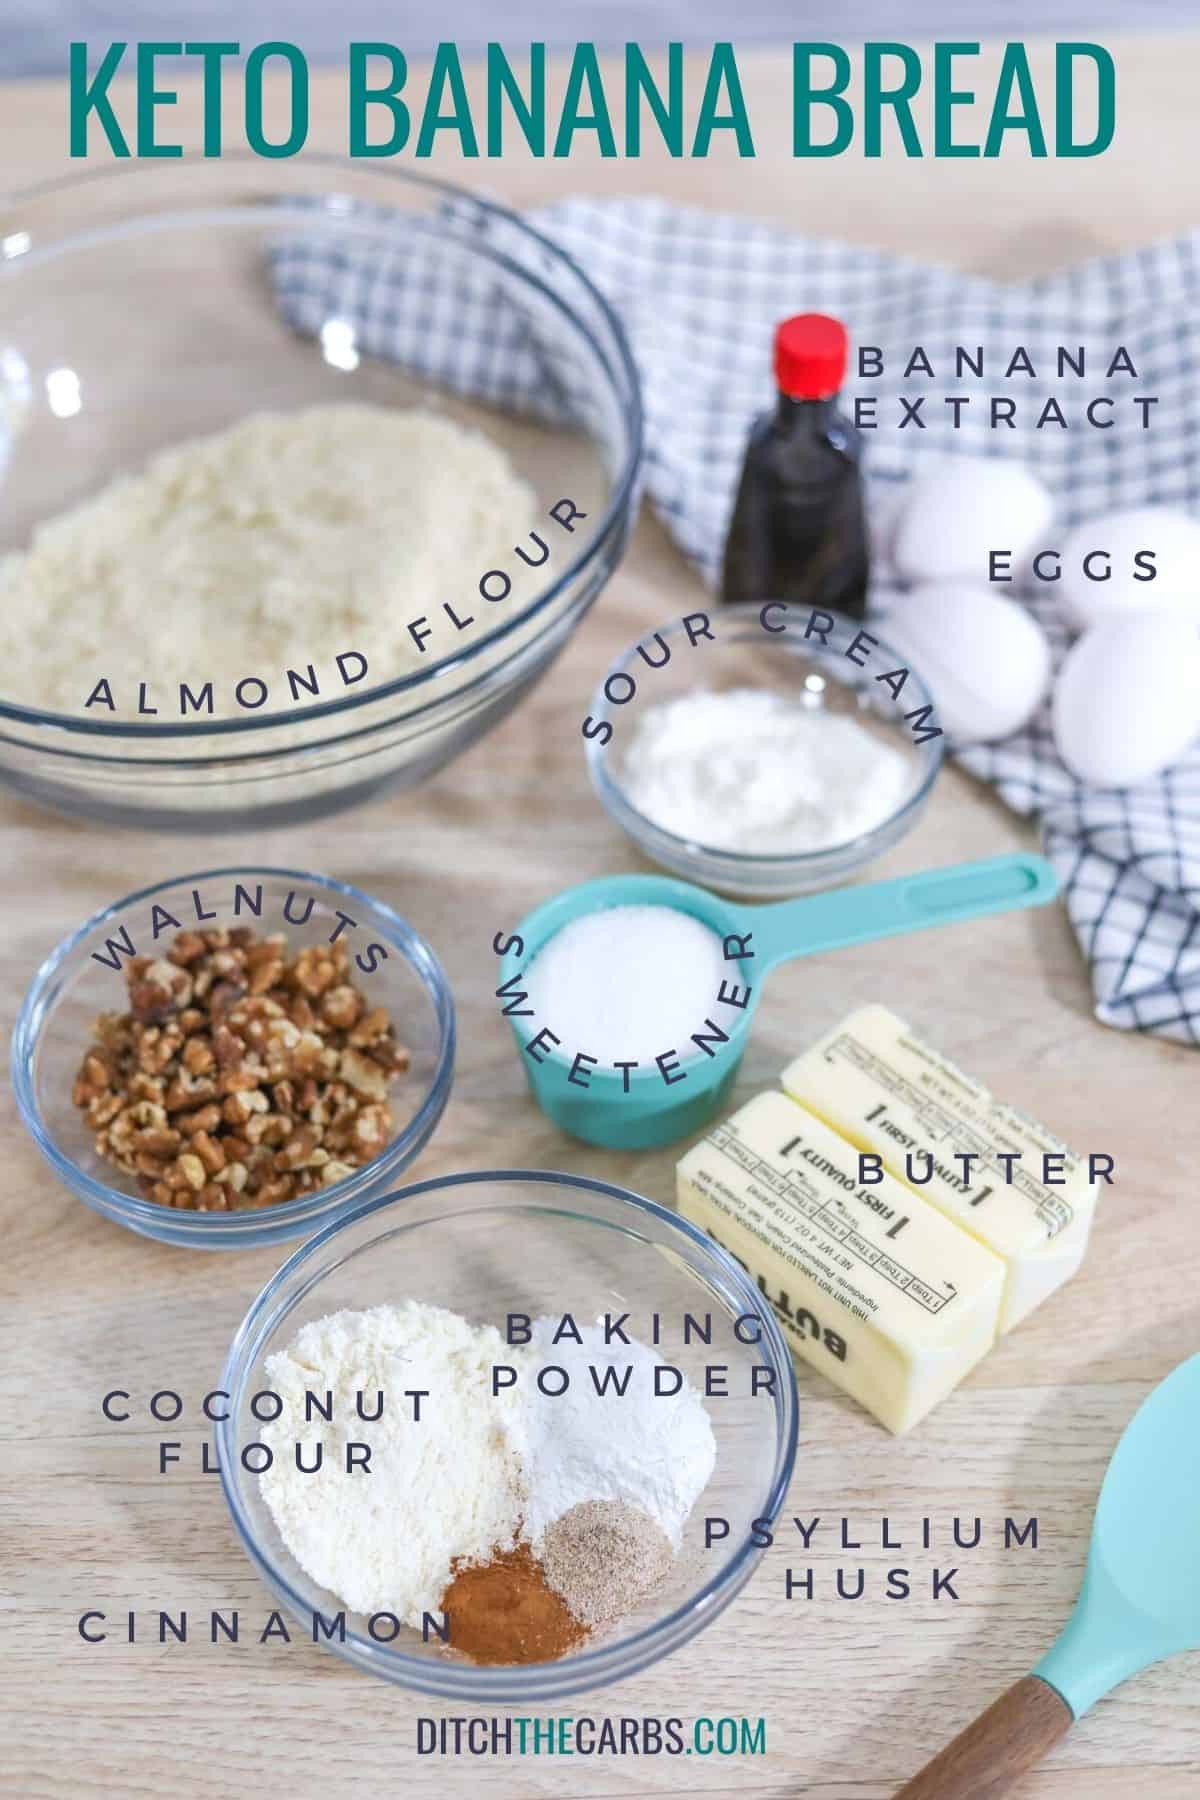 ingredients needed for keto banana bread - almond flour, coconut flour, eggs, sour cream, sweetener, walnuts, butter, spices